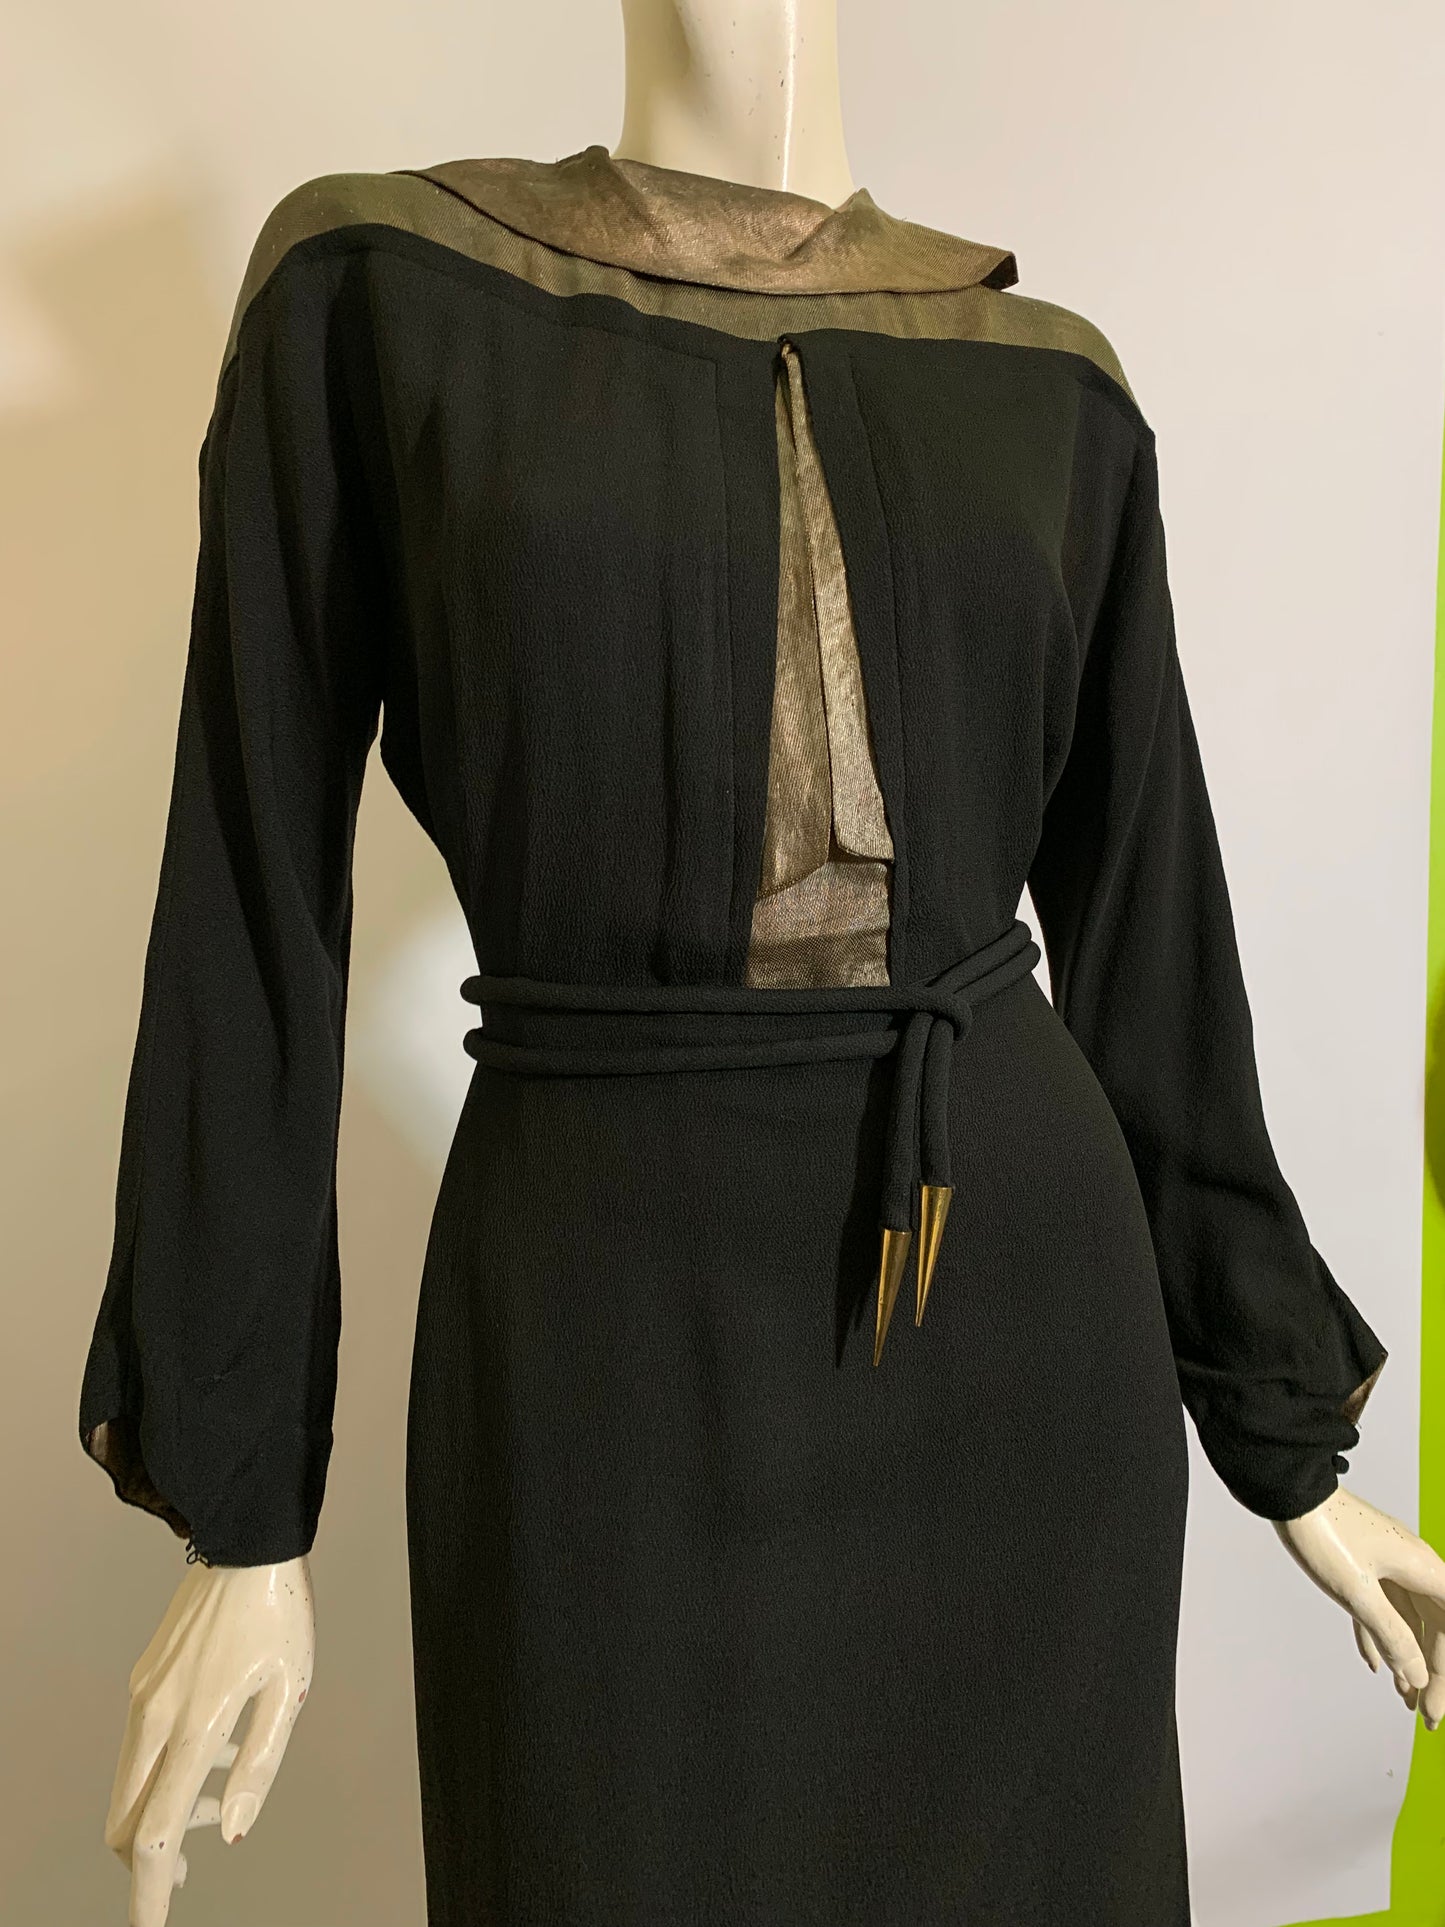 Black Crepe Rayon Evening Dress with Real Gold Metal Woven Accents circa 1930s